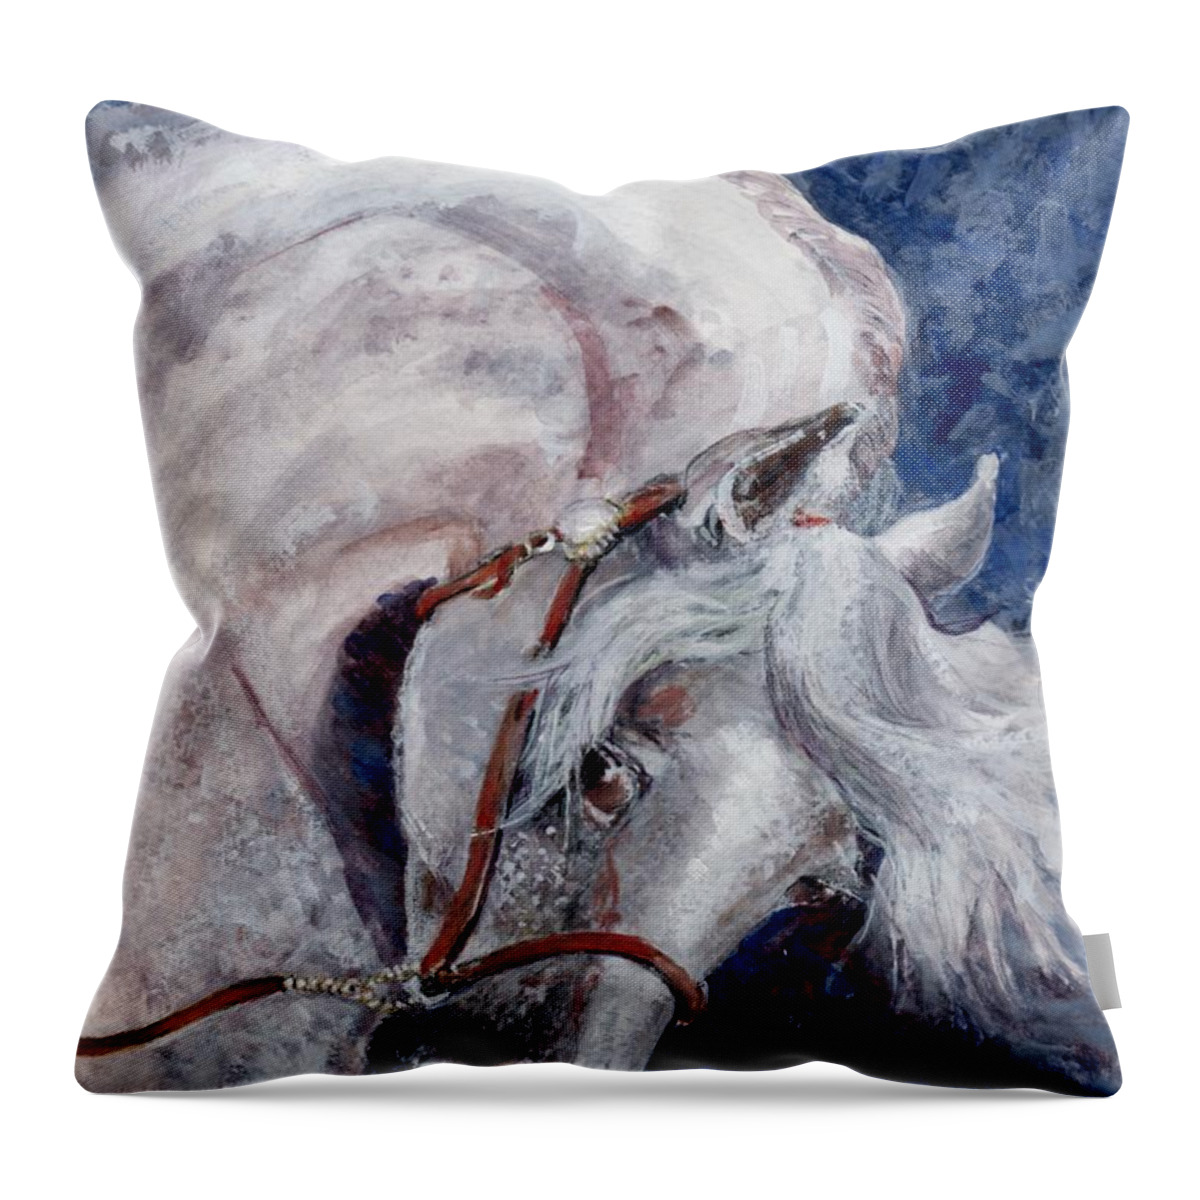 Animal Throw Pillow featuring the painting Major Portrait by Mary Armstrong